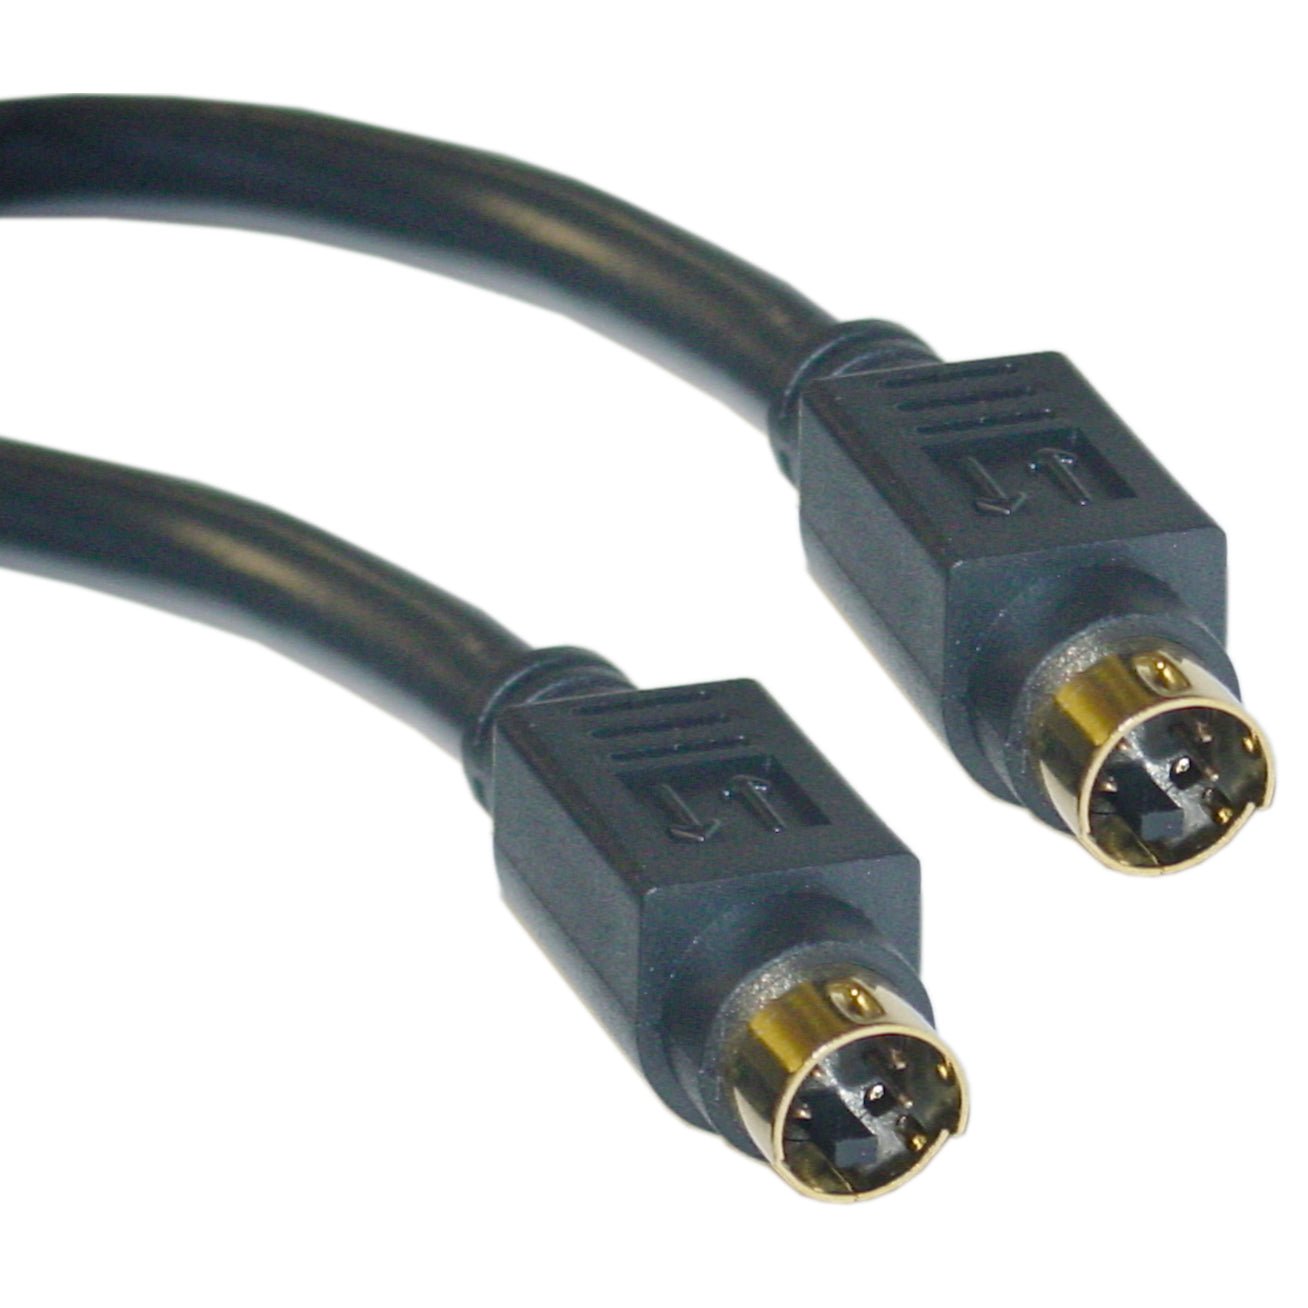 Inland Pro digital S-Video cable 25ft. - Bargainwizz